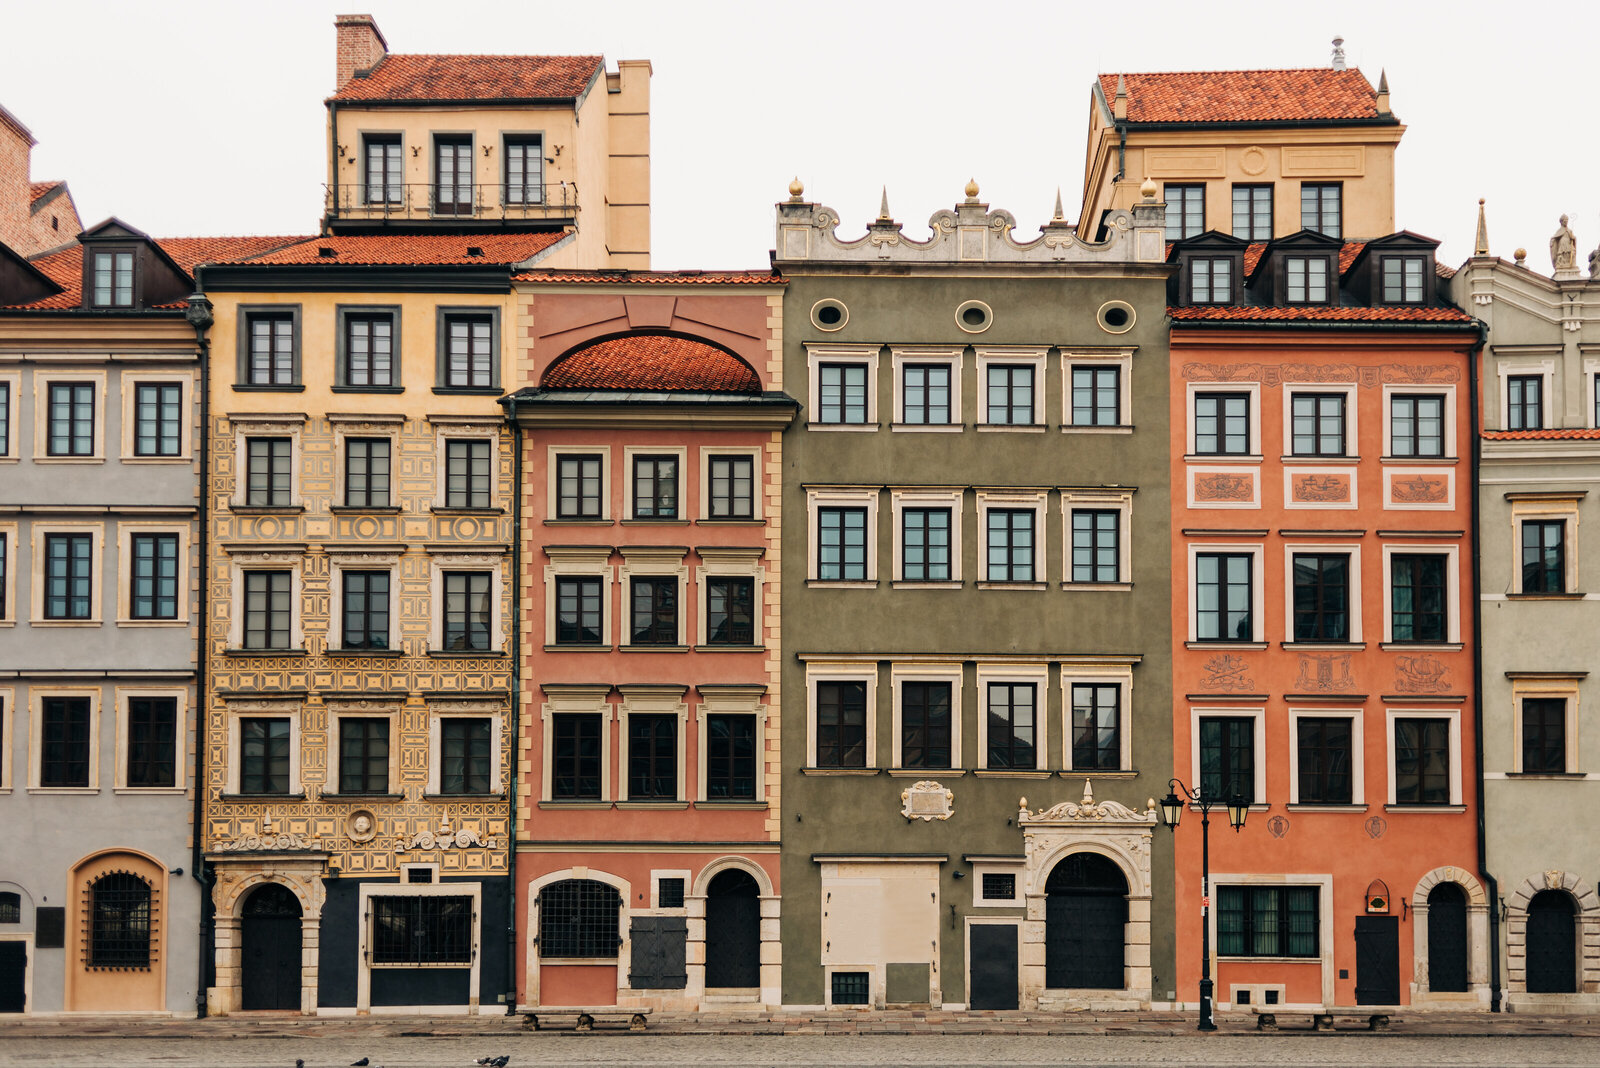 Colorful buildings in Warsaw, Poland